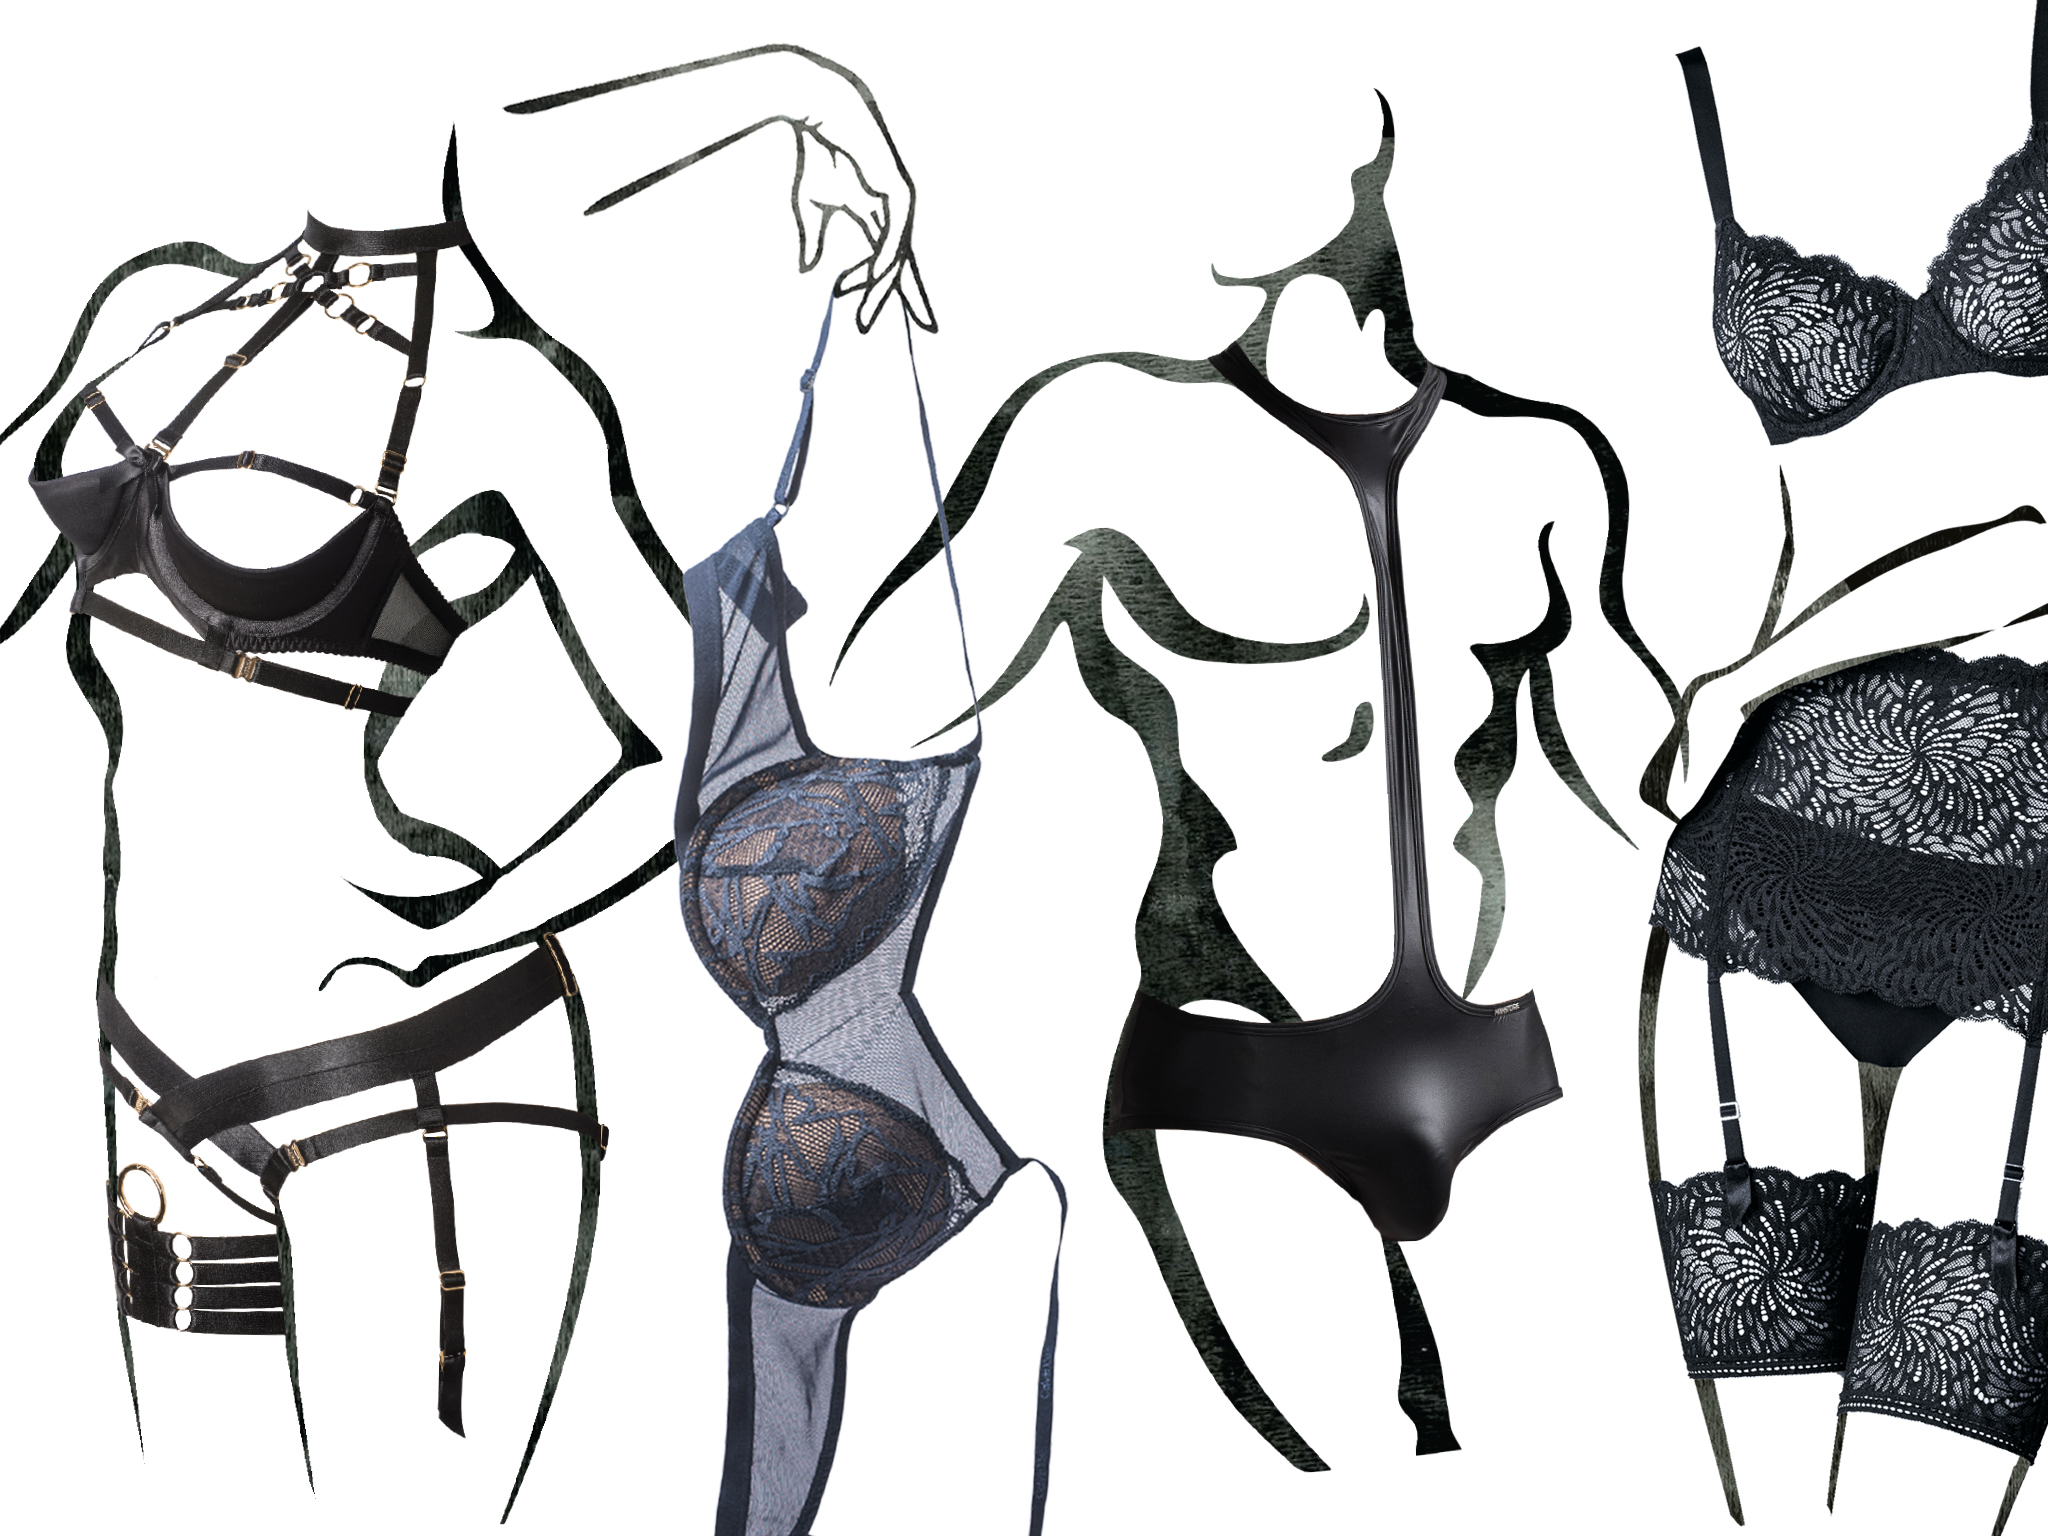 Camberwell lingerie business Dickory Dock marks 70 years